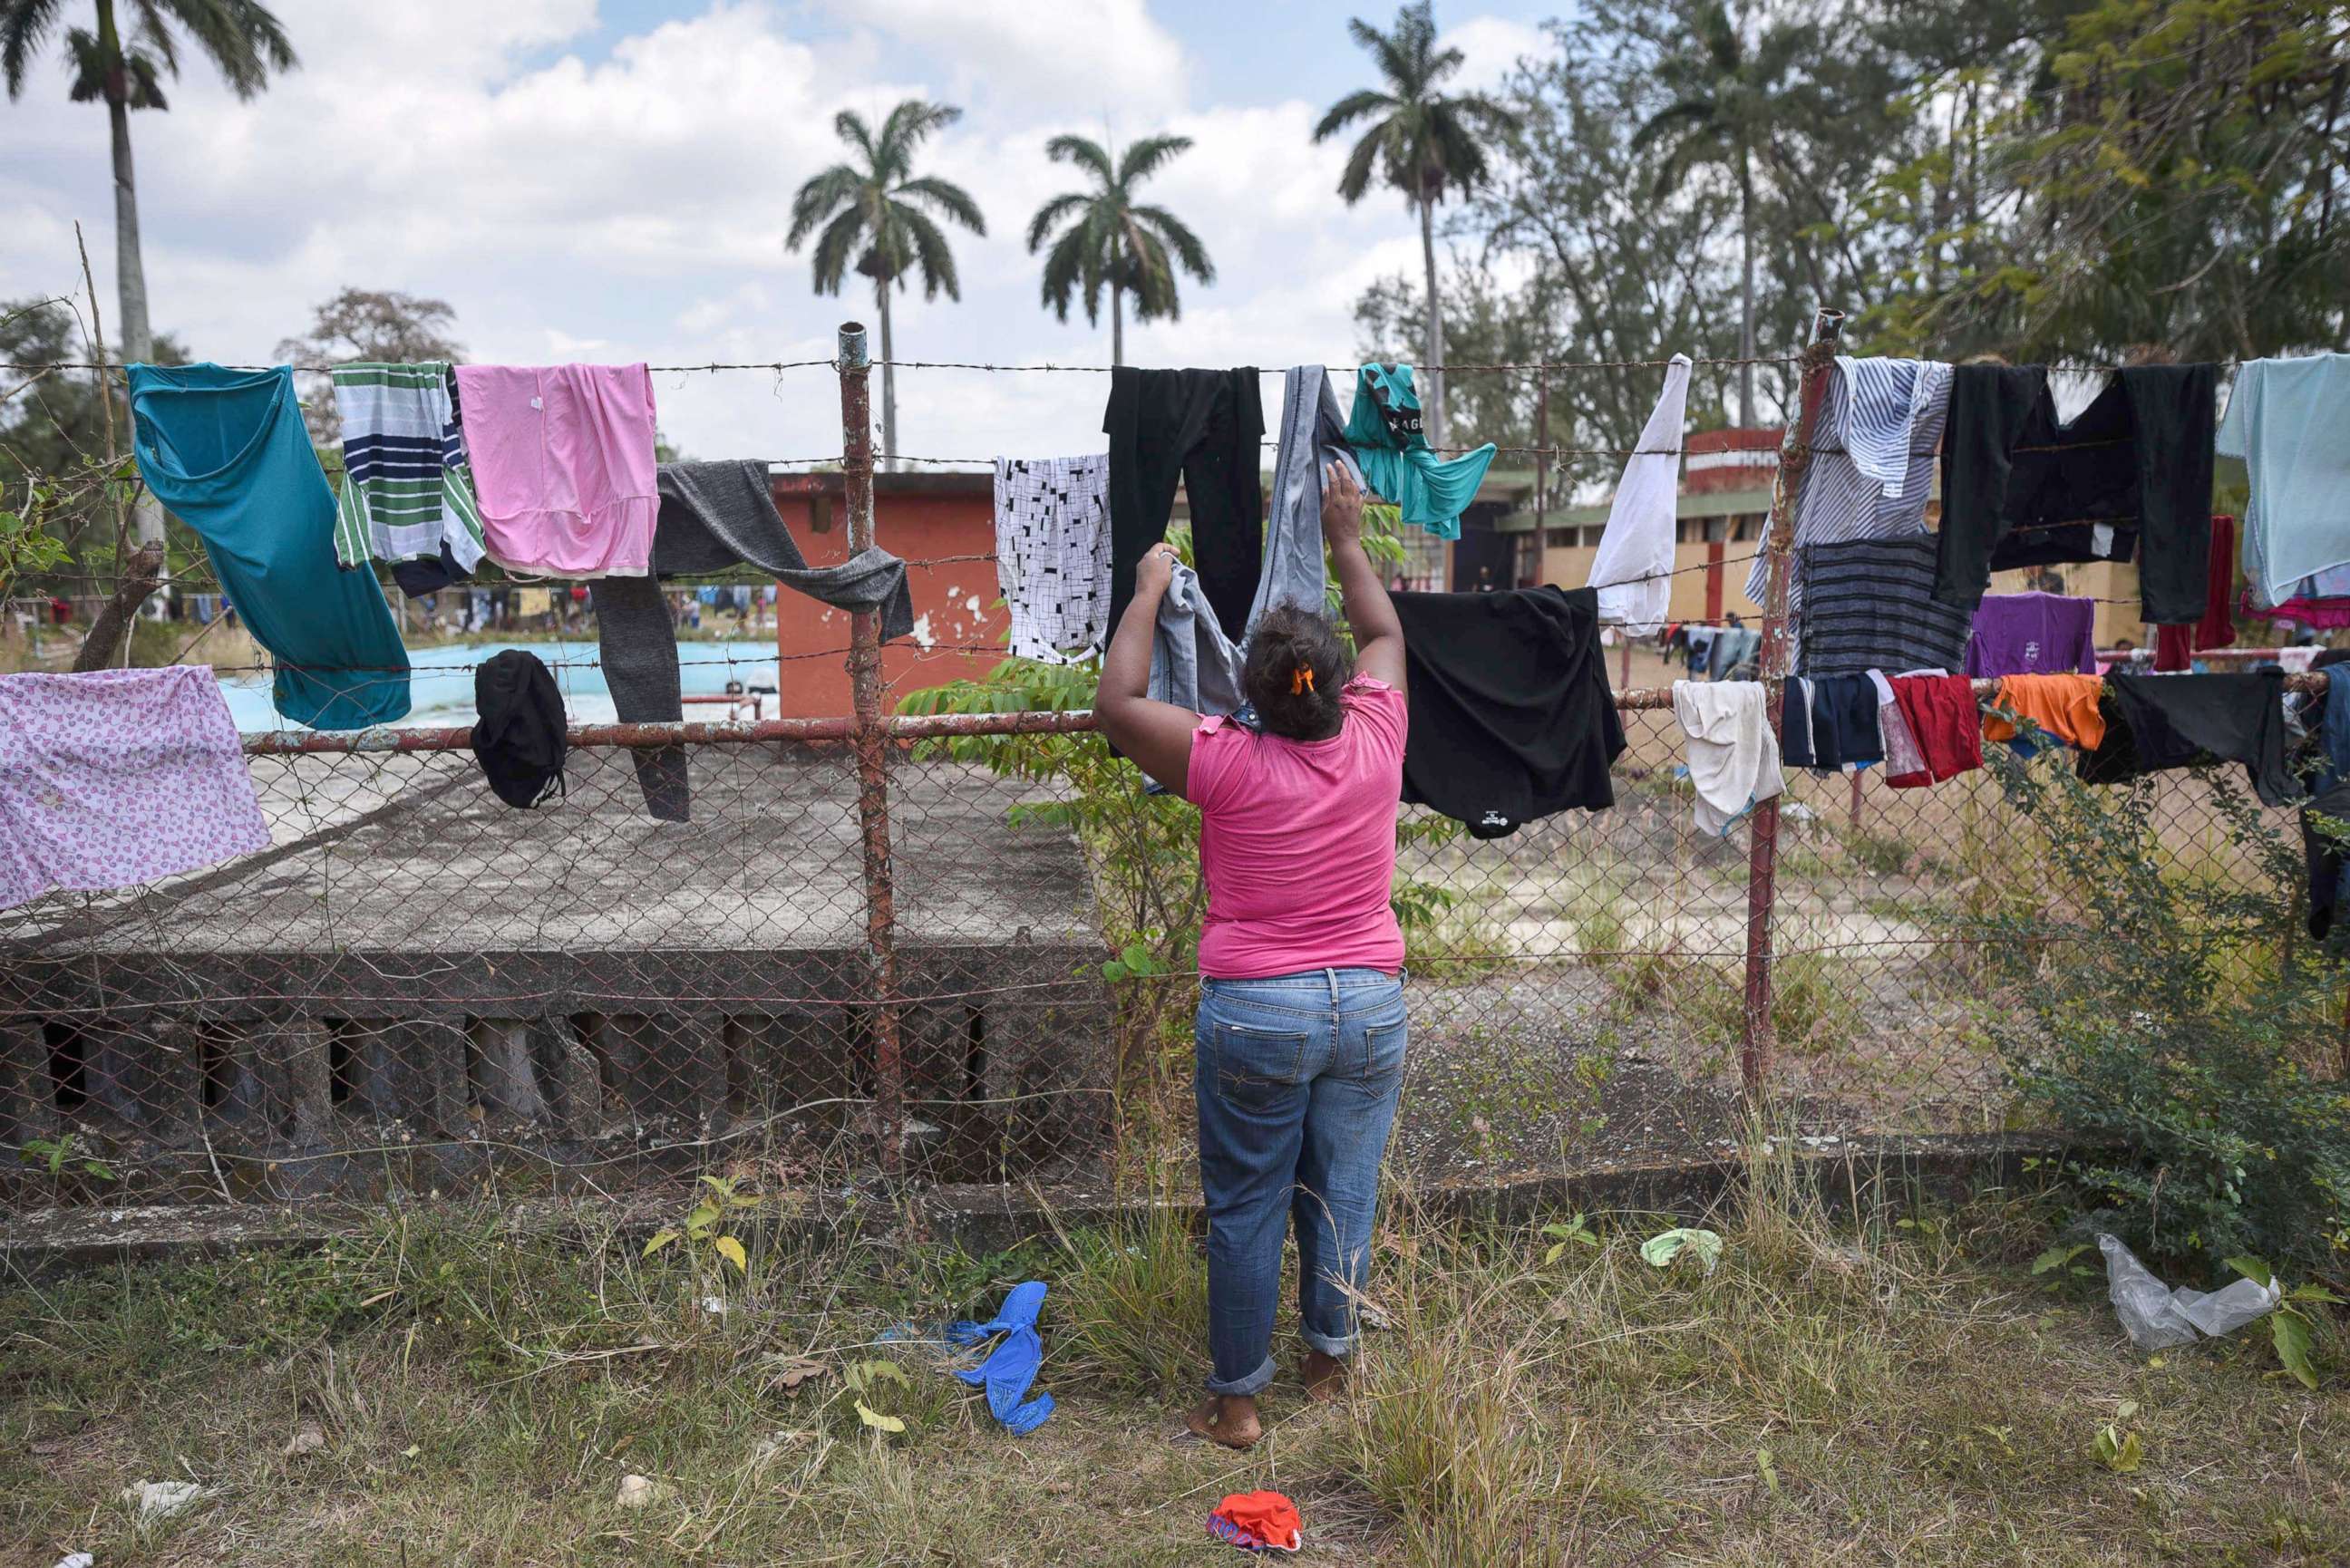 PHOTO: A Central American migrant taking part in a caravan called "Migrant Via Crucis" towards the U.S. hangs clothes to dry at a sports field in Matias Romero, Oaxaca State, Mexico, April 3, 2018.